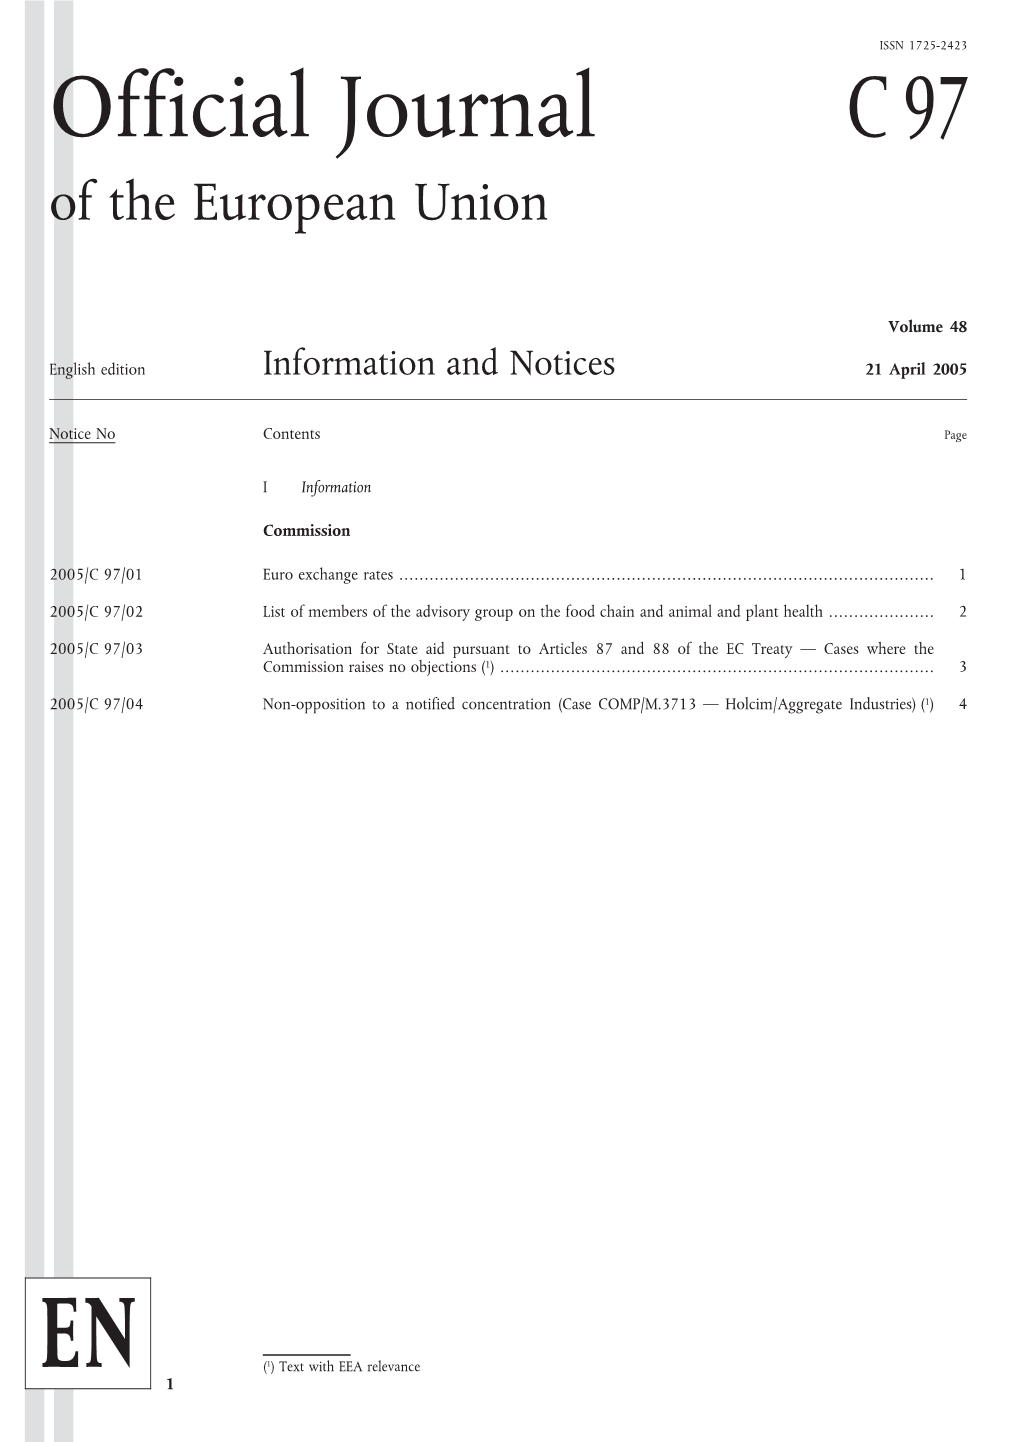 Official Journal C97 of the European Union